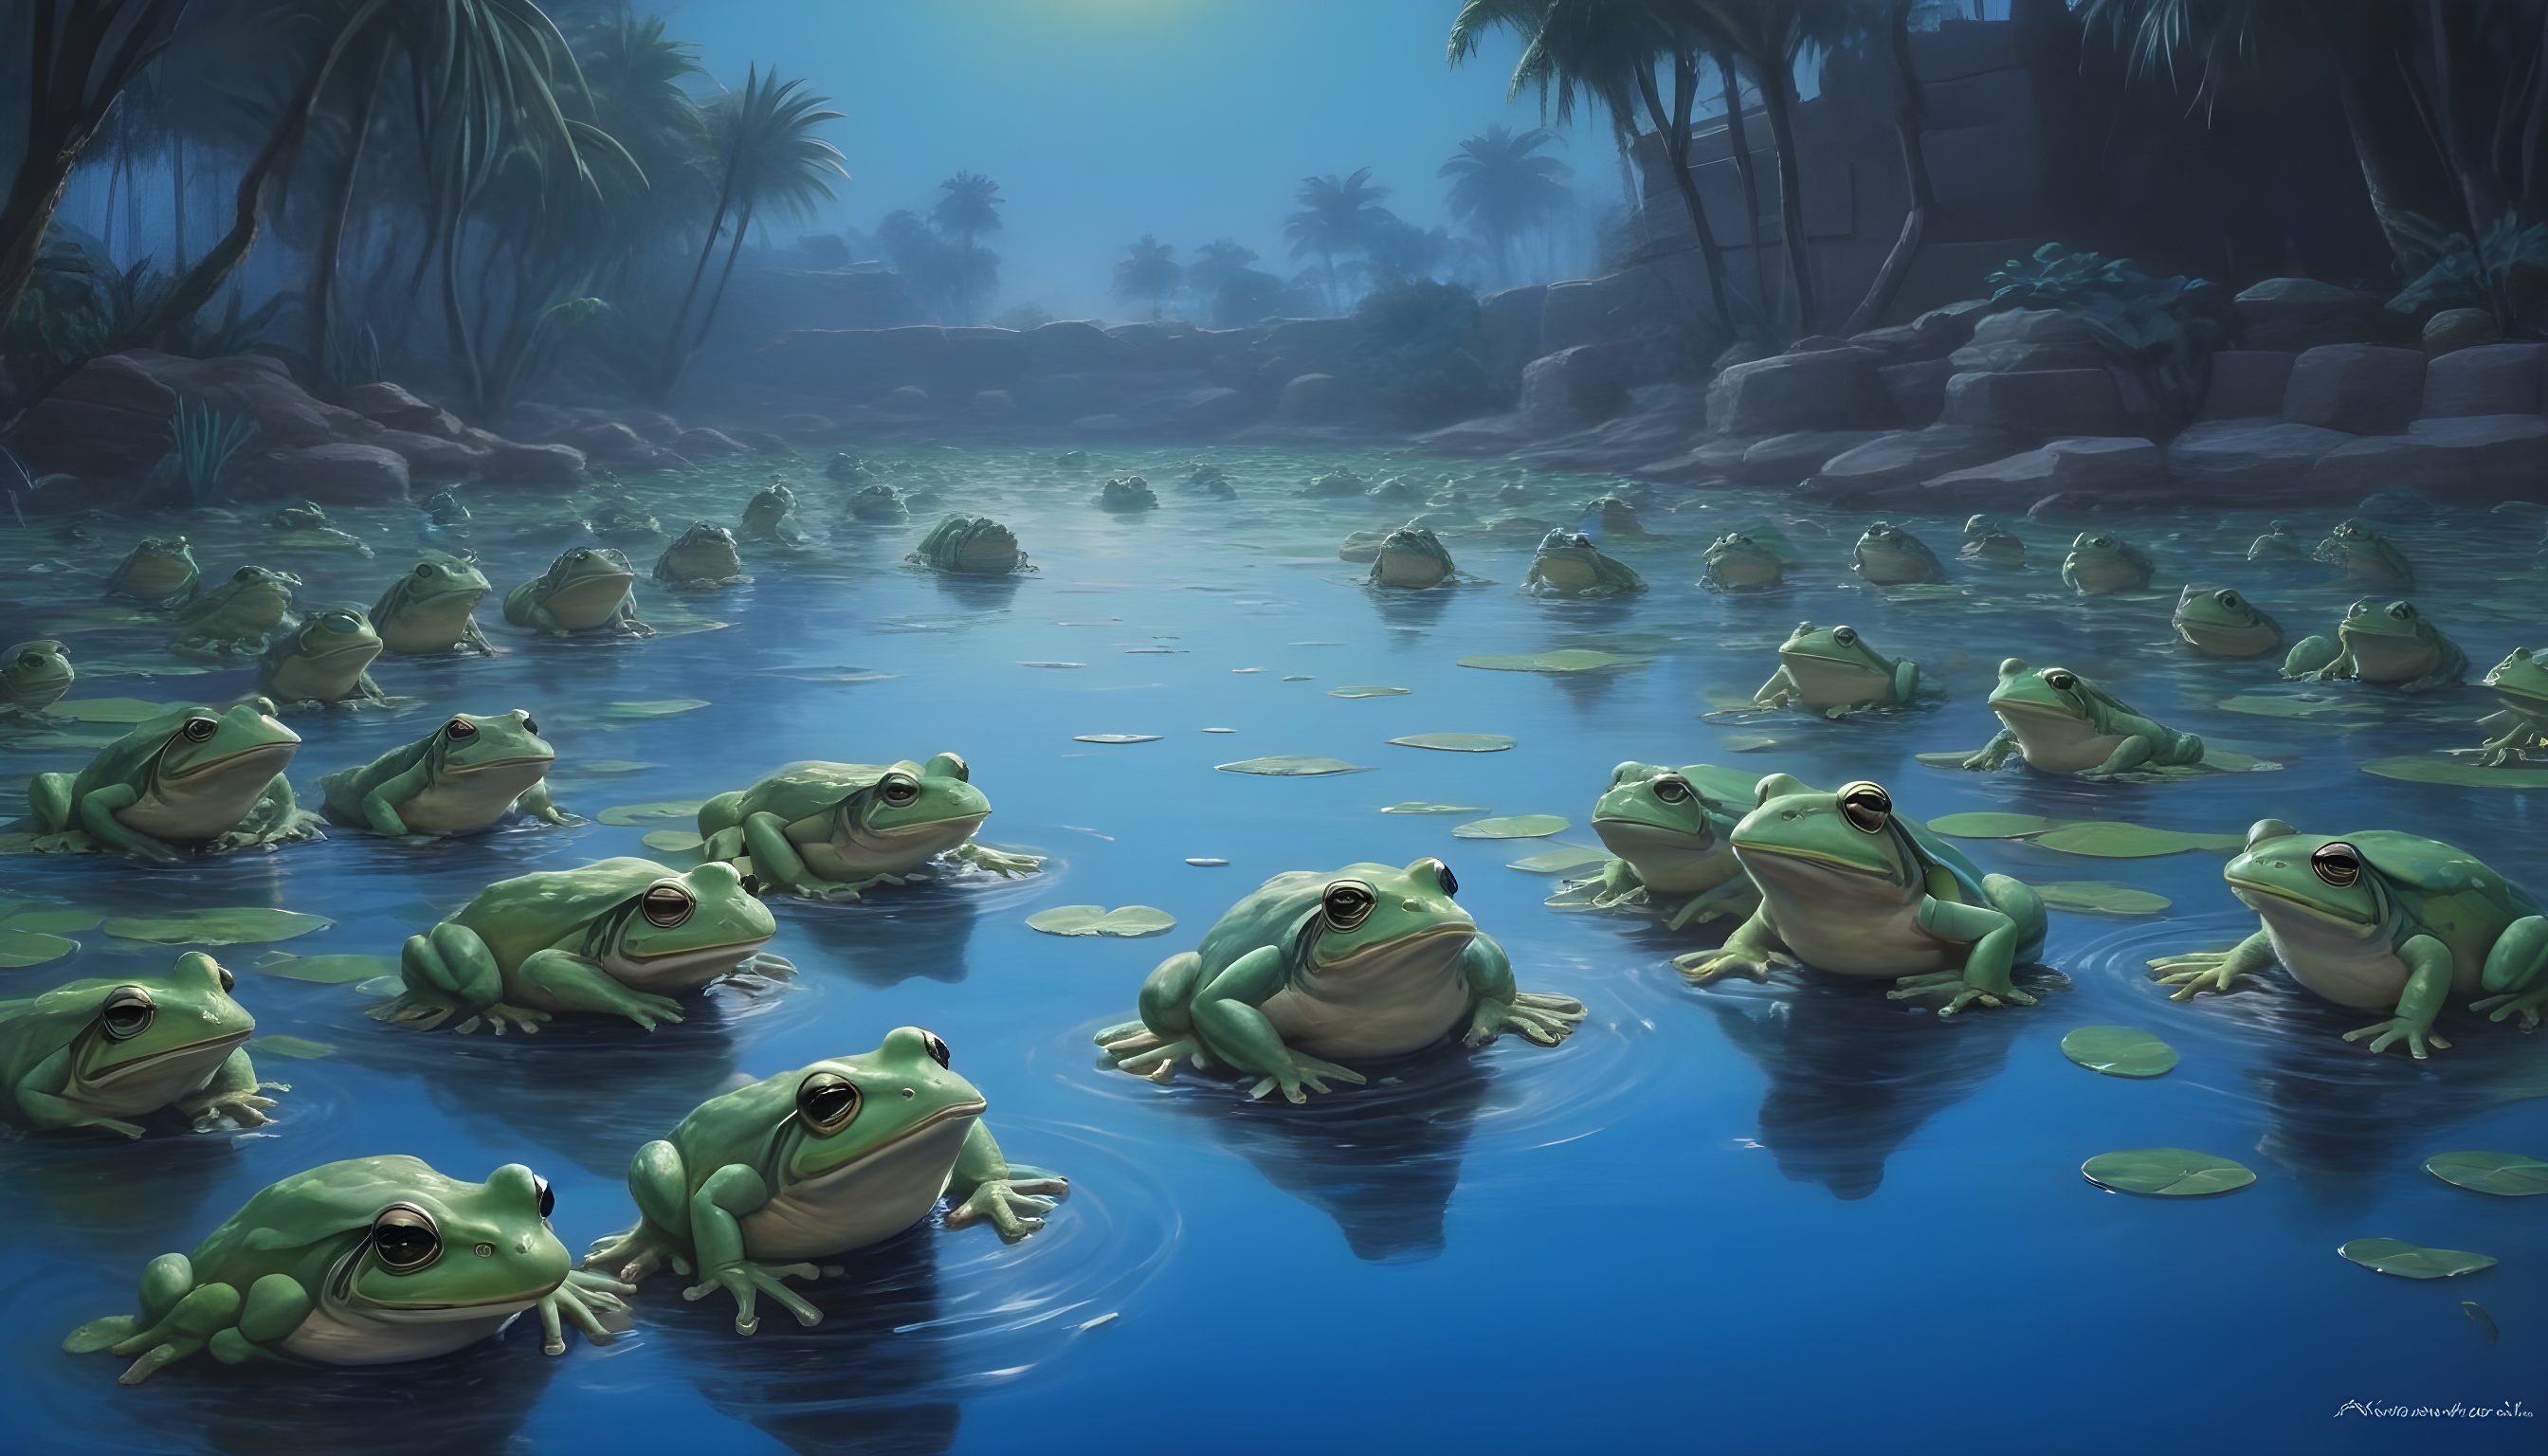 Egyptian-people-trying-to-function-amidst-a-lively-scene-of-hundreds-of-green-frogs--each-one-...jpg